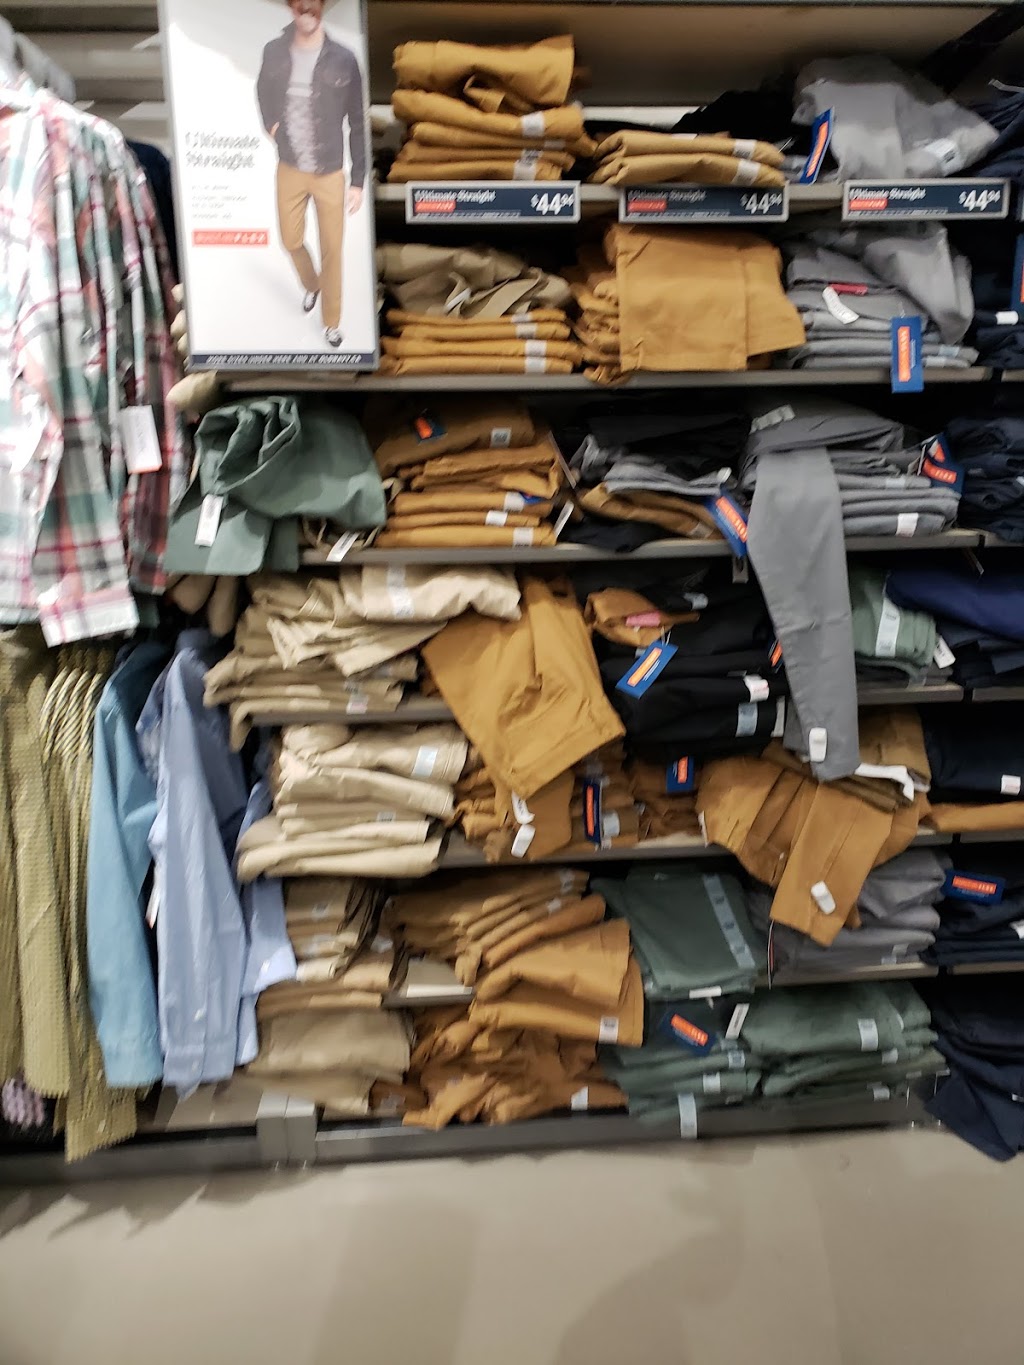 Old Navy | CROSSIRON MILLS, 261055 Crossiron Blvd ste p-630, Rocky View No. 44, AB T4A 0G3, Canada | Phone: (587) 535-1394